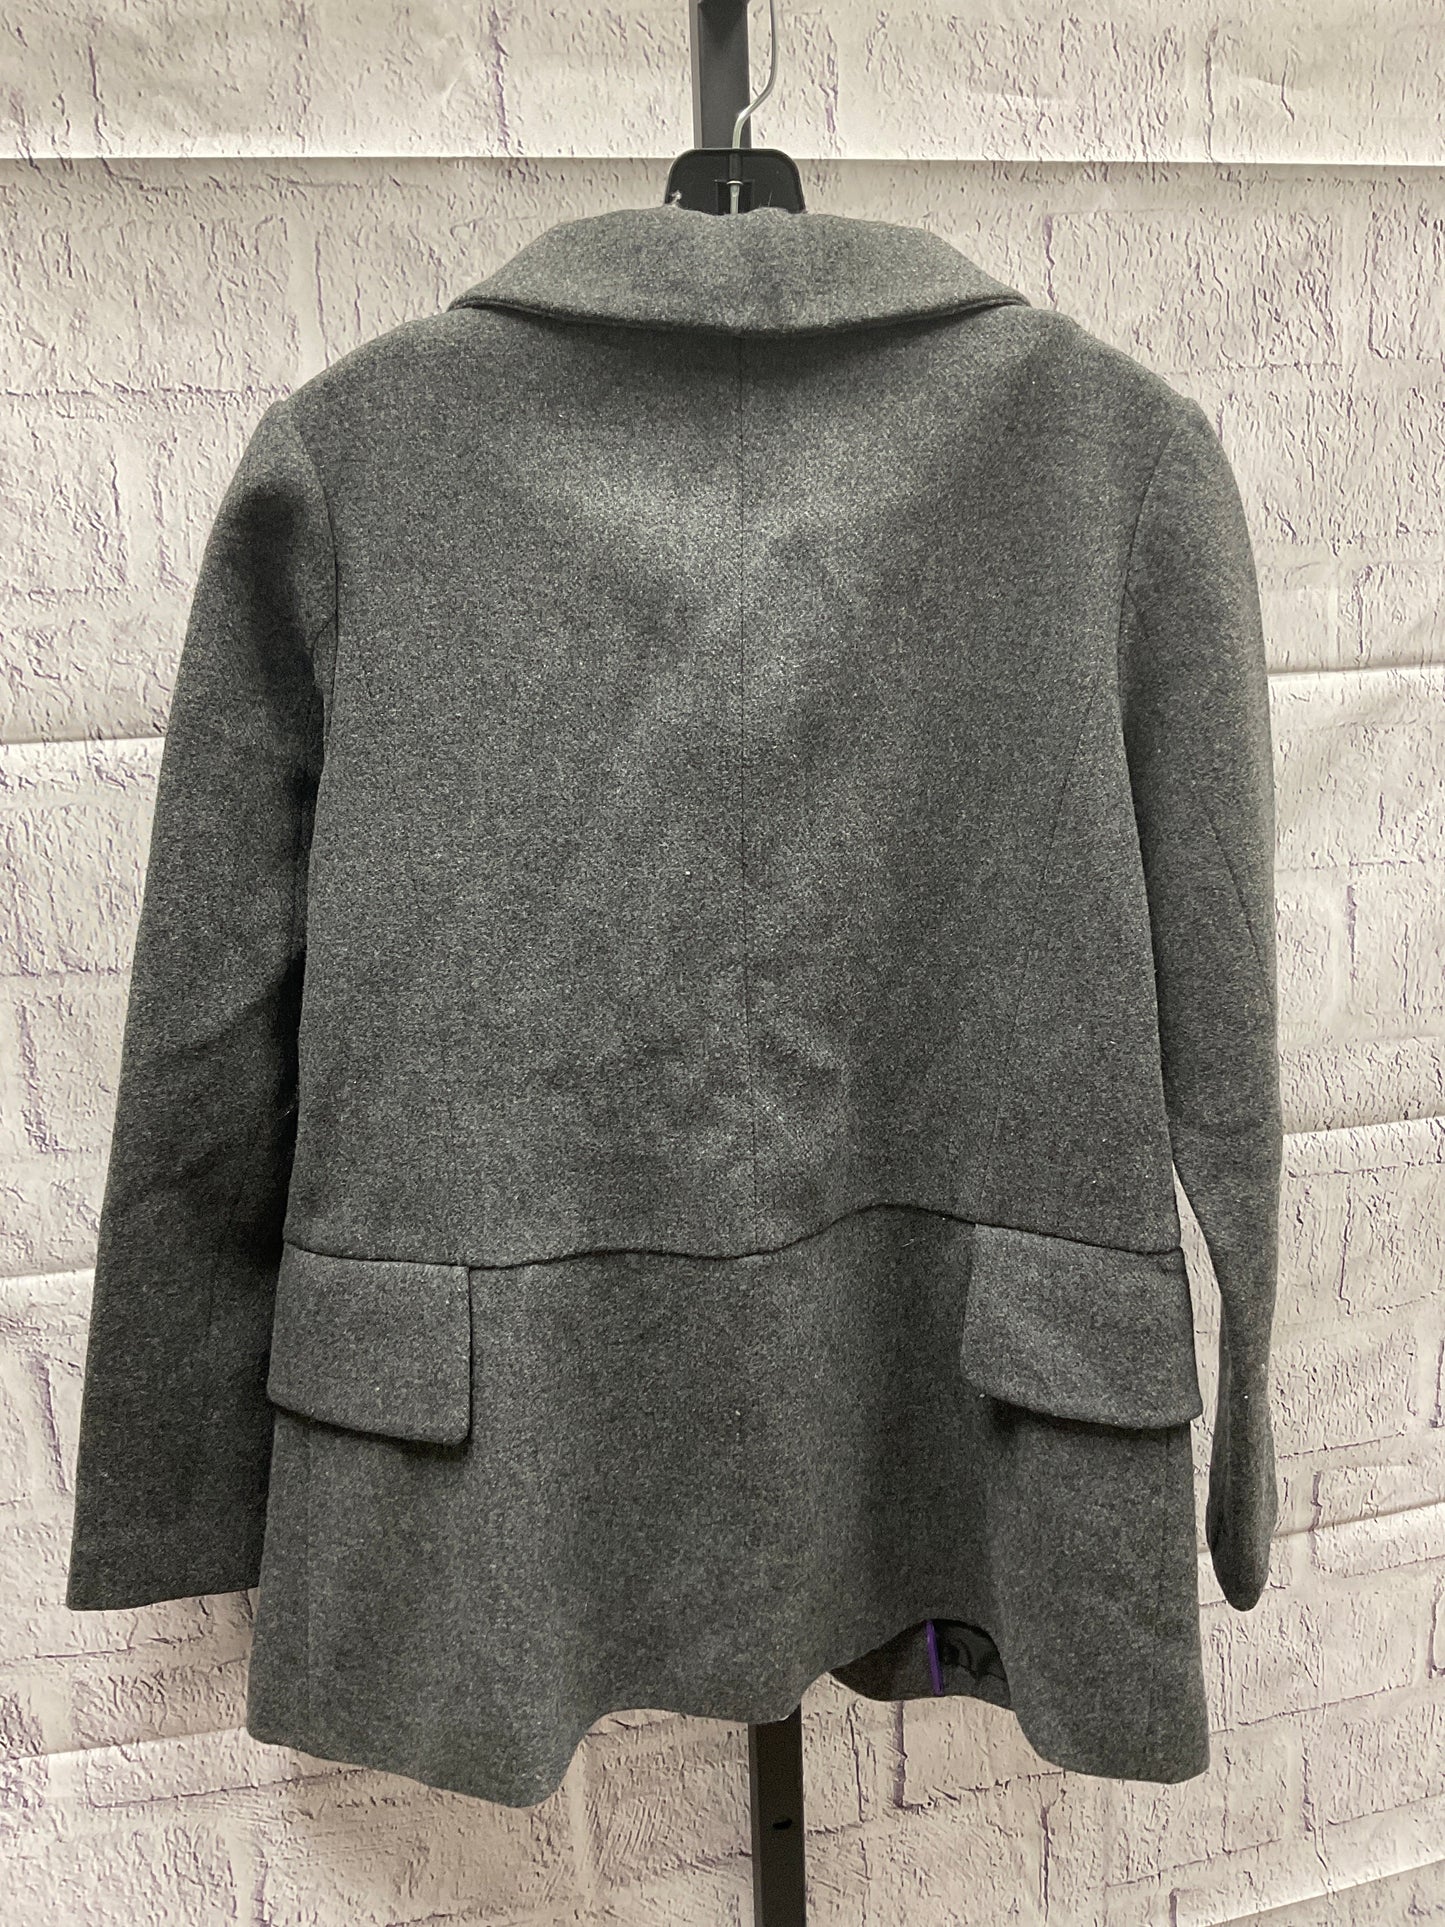 Coat Other By Clothes Mentor  Size: S